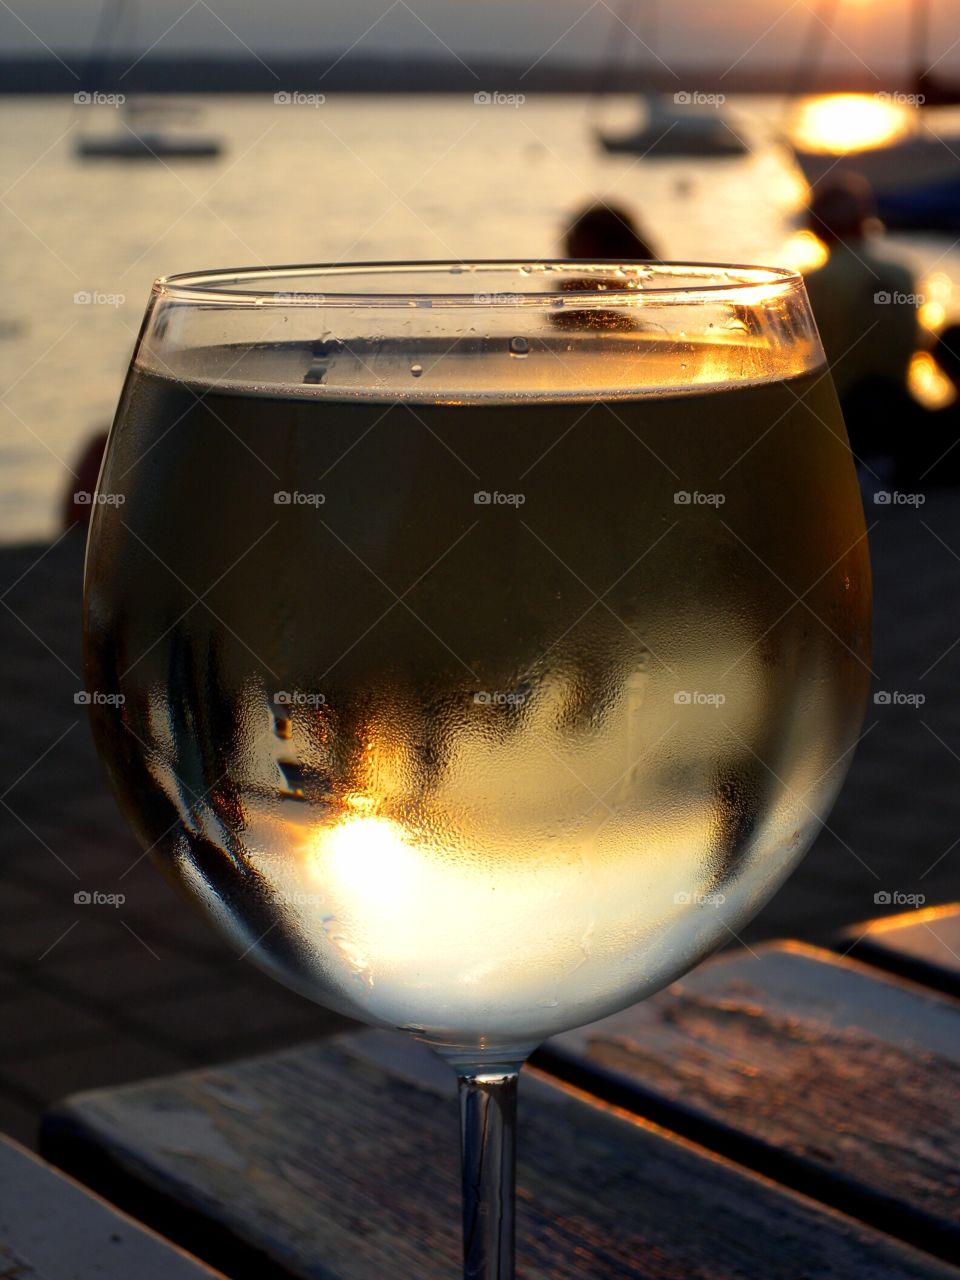 glass of wine in the evening
Glas Wein am Abend